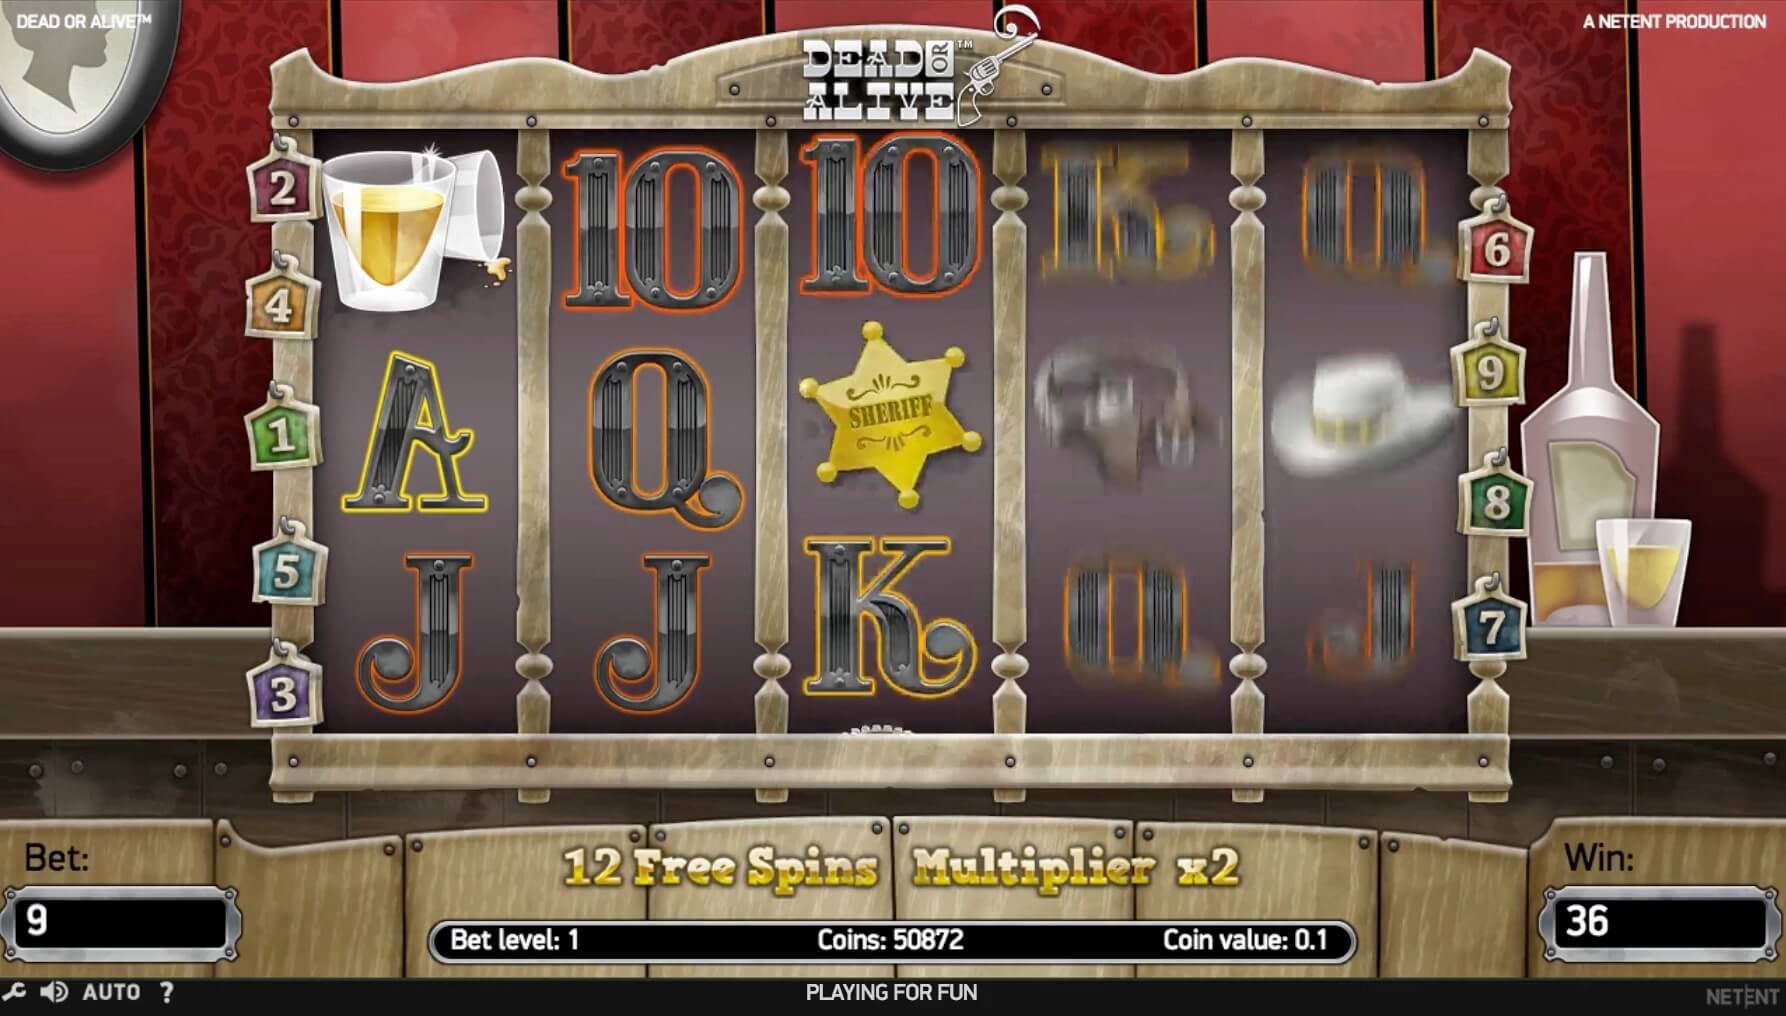 dead or alive slot machine review